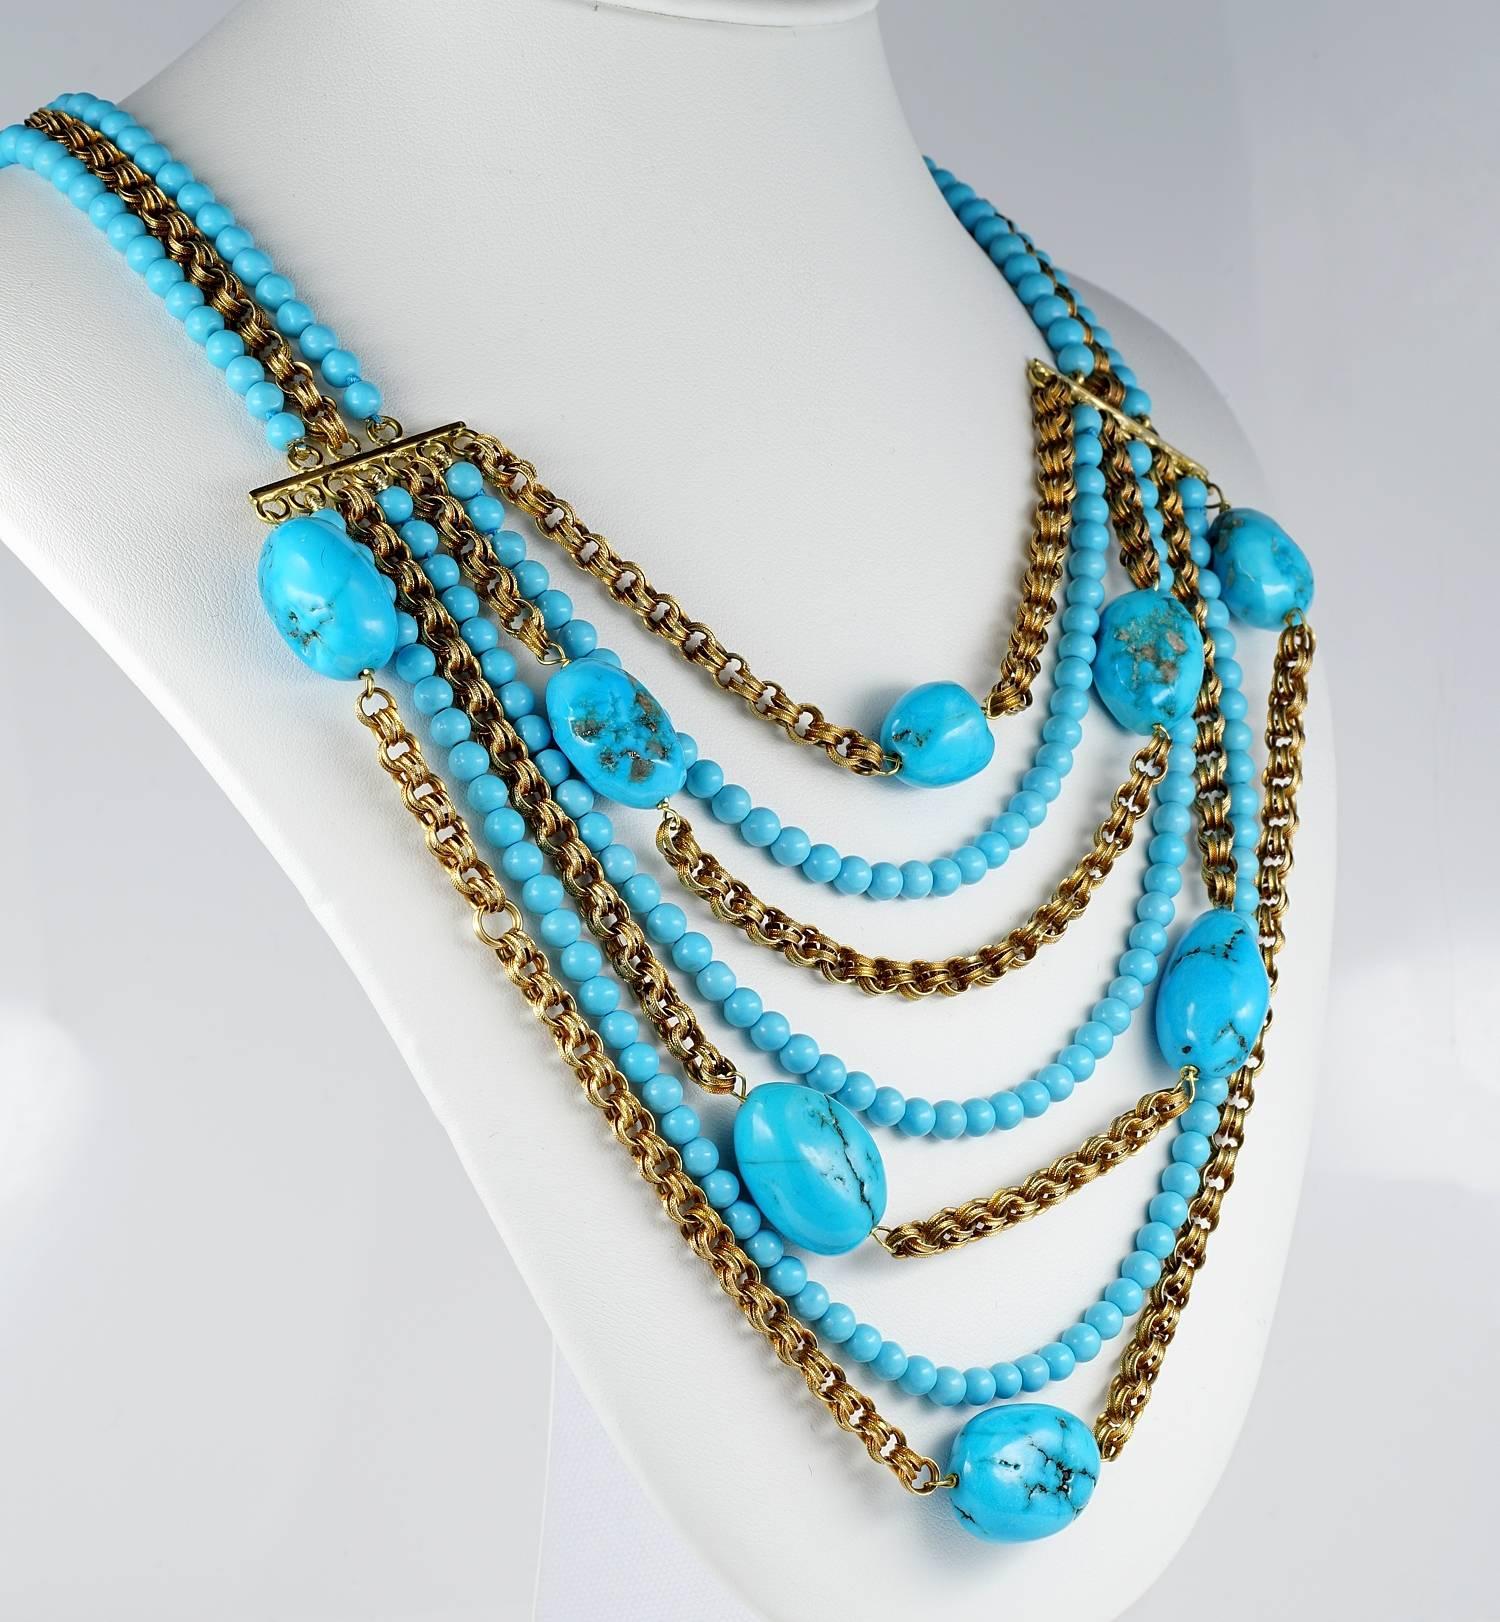 A fine set made of natural Turquoise beautifully mounted in 18 KT solid gold multistrand set comprising necklace and bracelet
Charming chic composition made out of distinctive links gold chains mixed up with nuggets of Natural Turquoise and strands